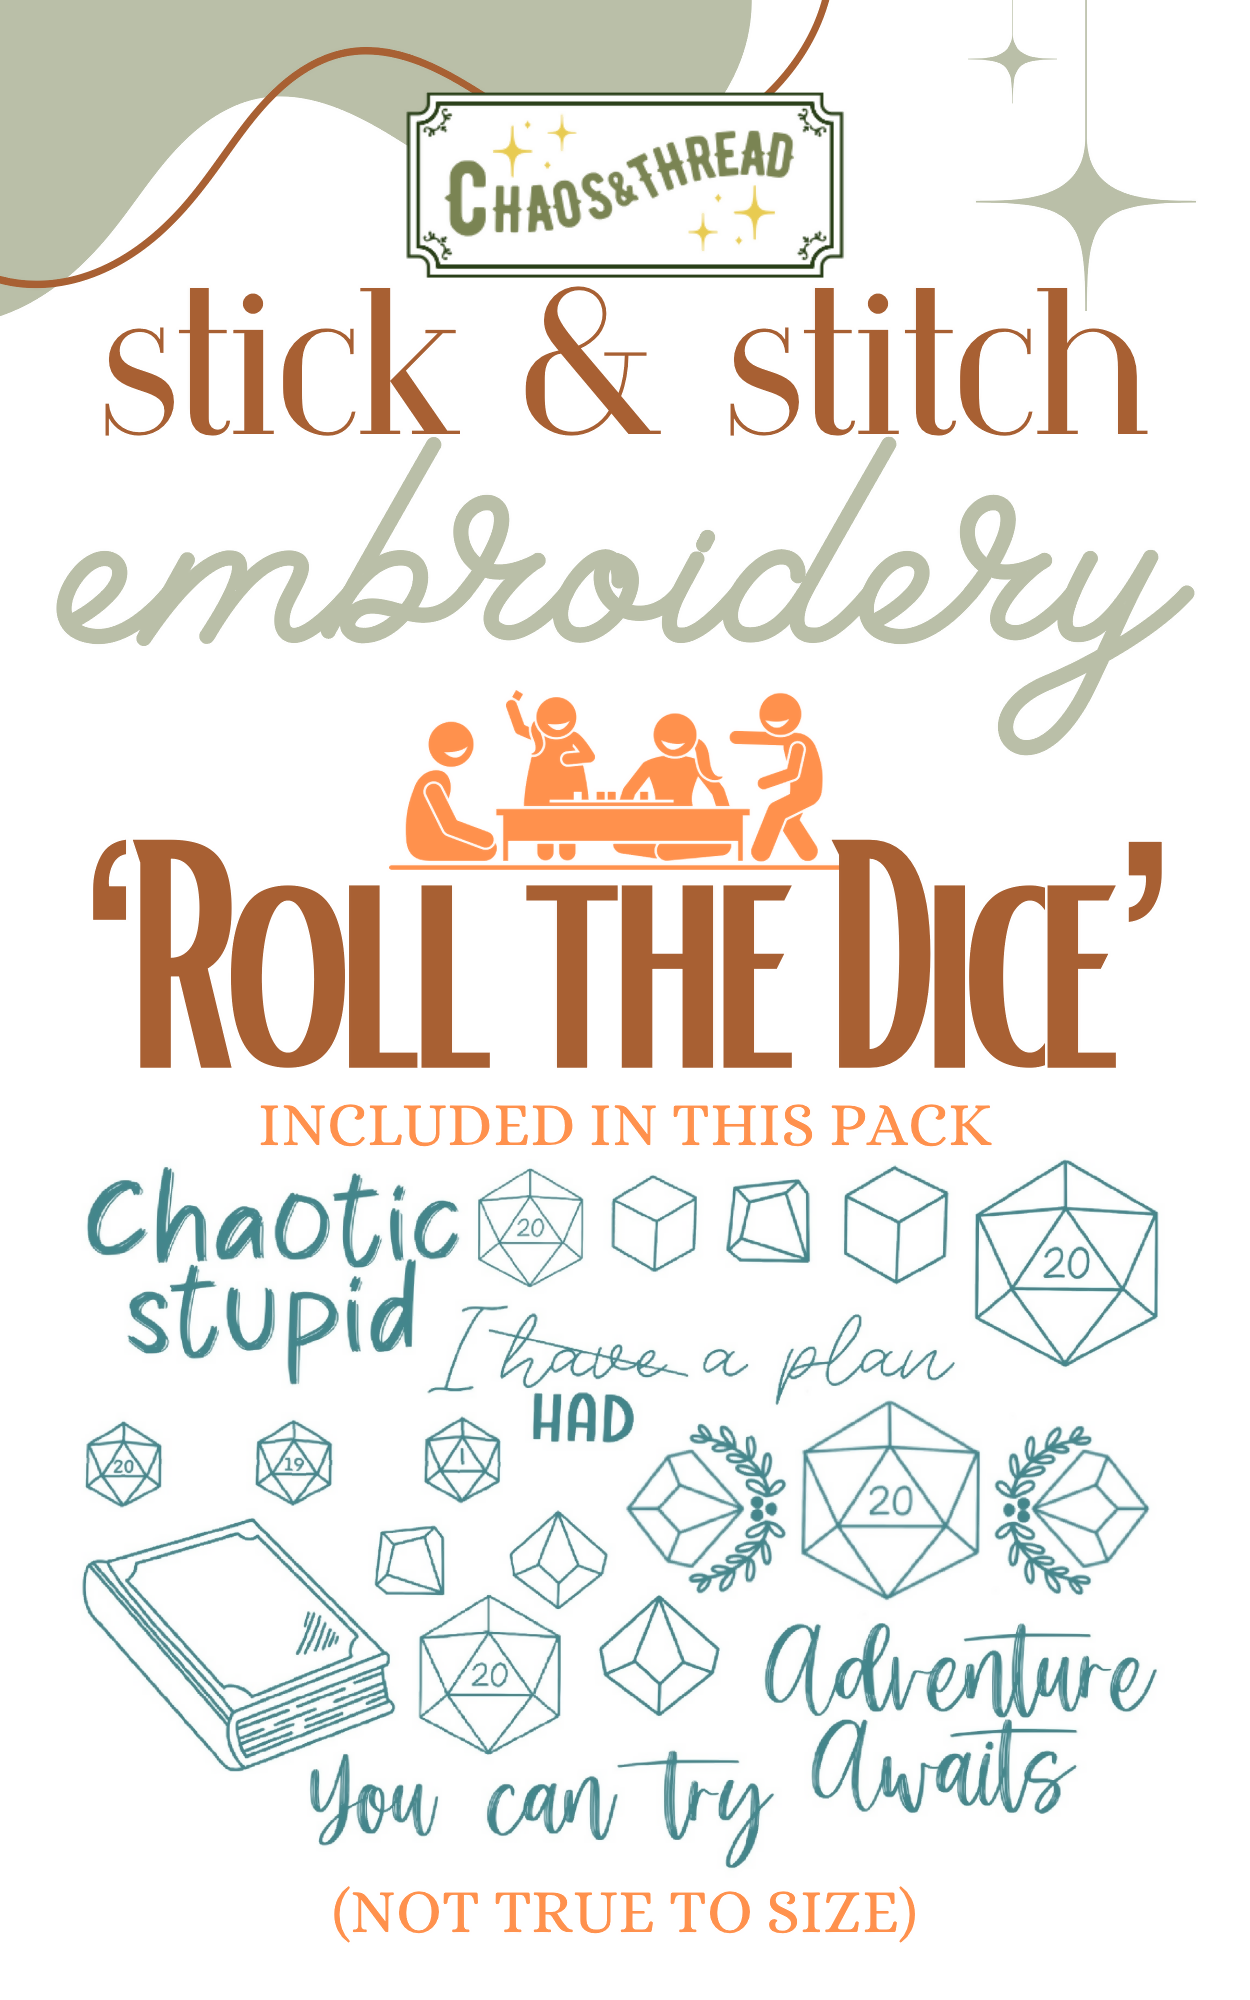 Chaos and Thread - Stick and Stitch pack - Roll the Dice